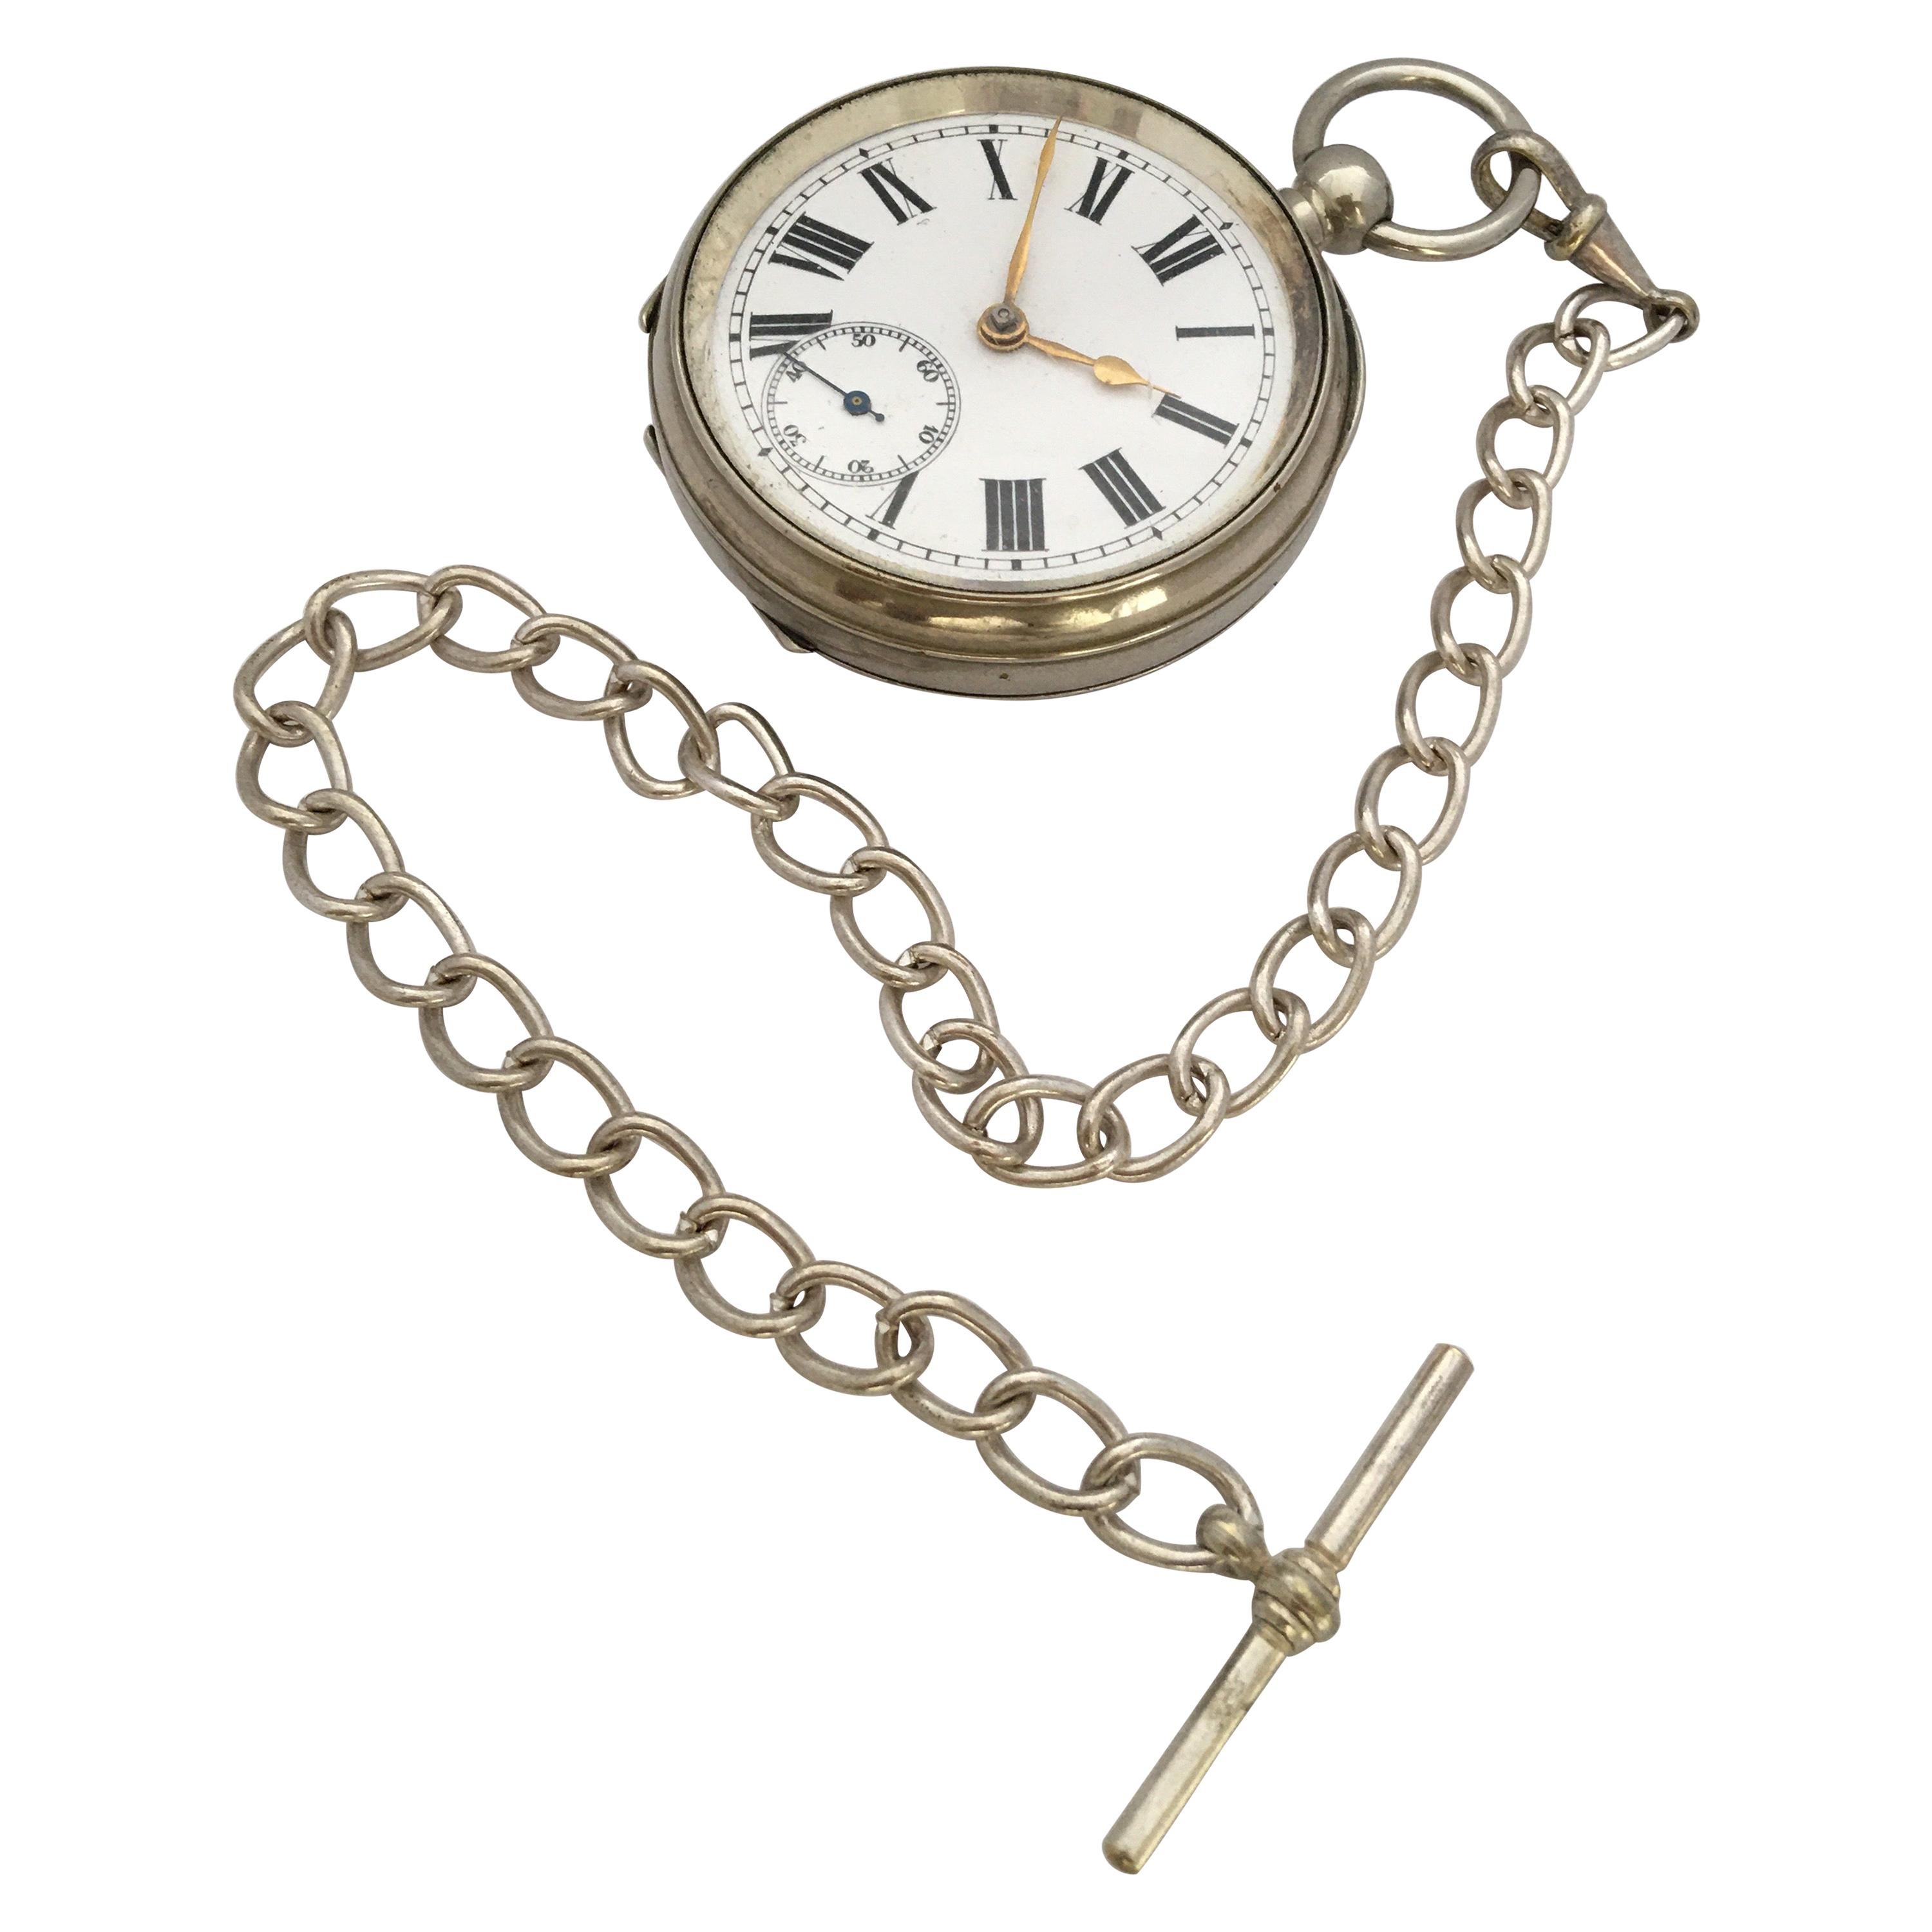 Antique Silver Plated Key-Winding Pocket Watch with a Chain